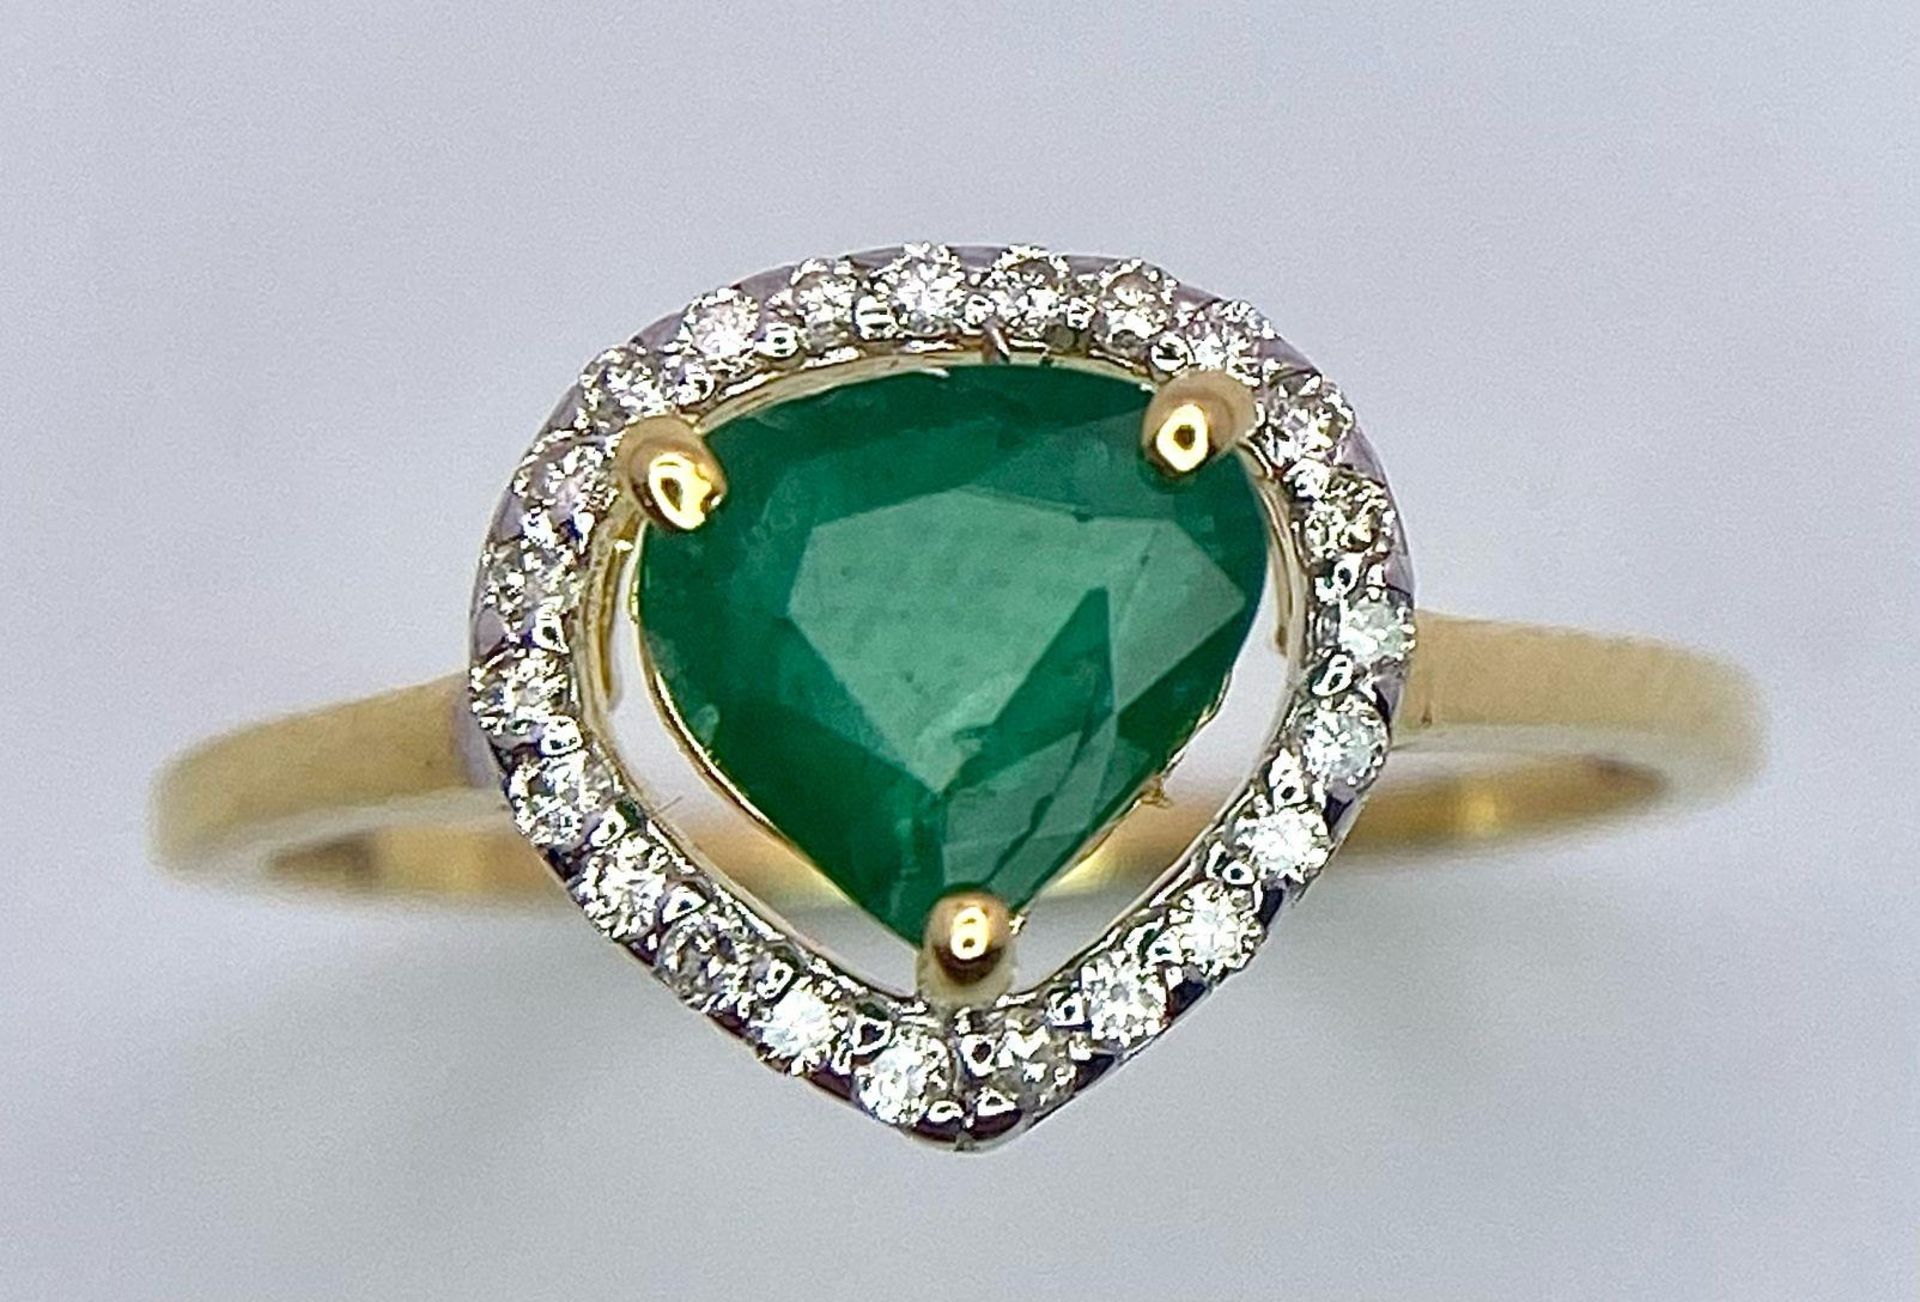 A 14K Gold Heart Shaped Emerald Gemstone Ring - with 0.18ctw of Diamond Accents. Emerald - 0.75ct. - Image 2 of 7